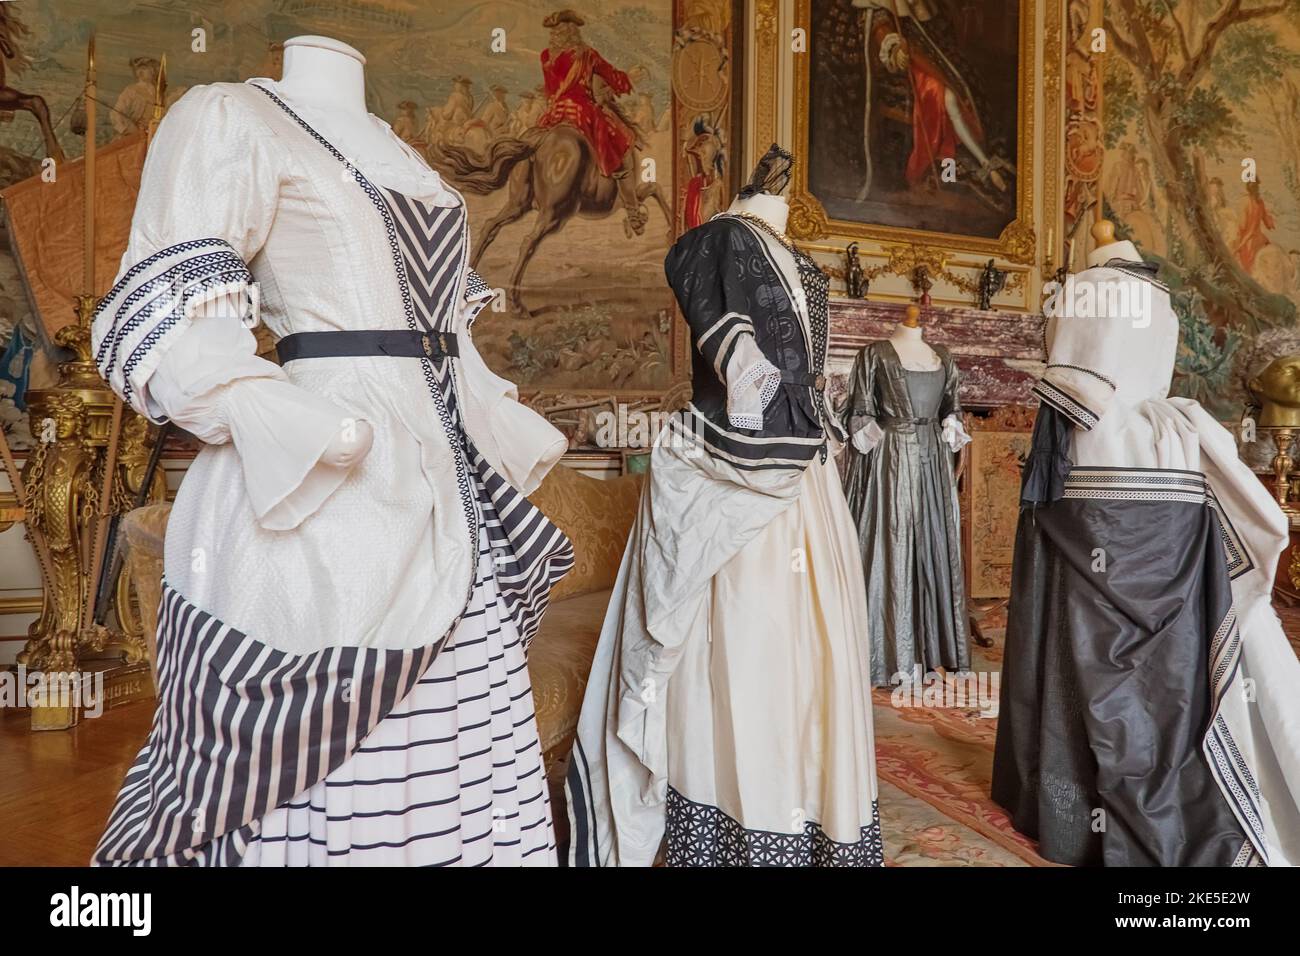 England, Oxfordshire, Woodstock, Blenheim Palace, The Second State Room, costumes from the successful 2018 film The Favourite in which Olivia Colman won an Oscar for her portrayal of Queen Anne. Stock Photo